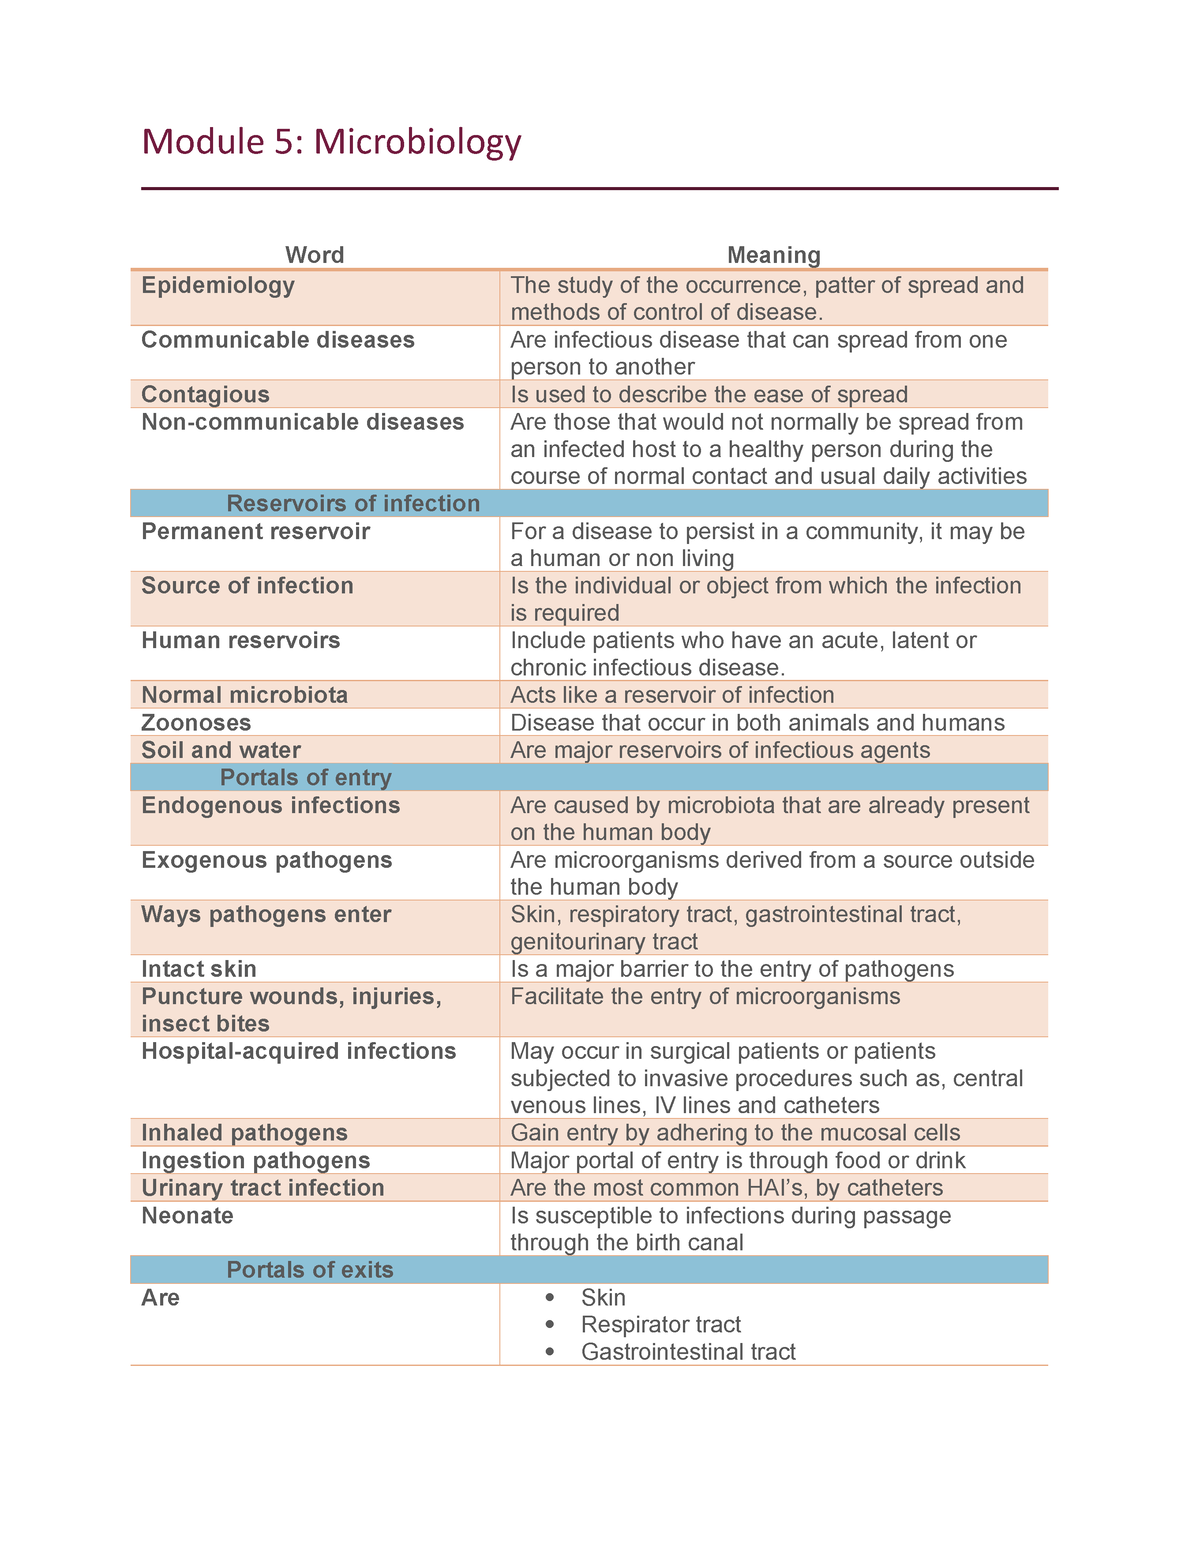 microbiology case study examples with answers